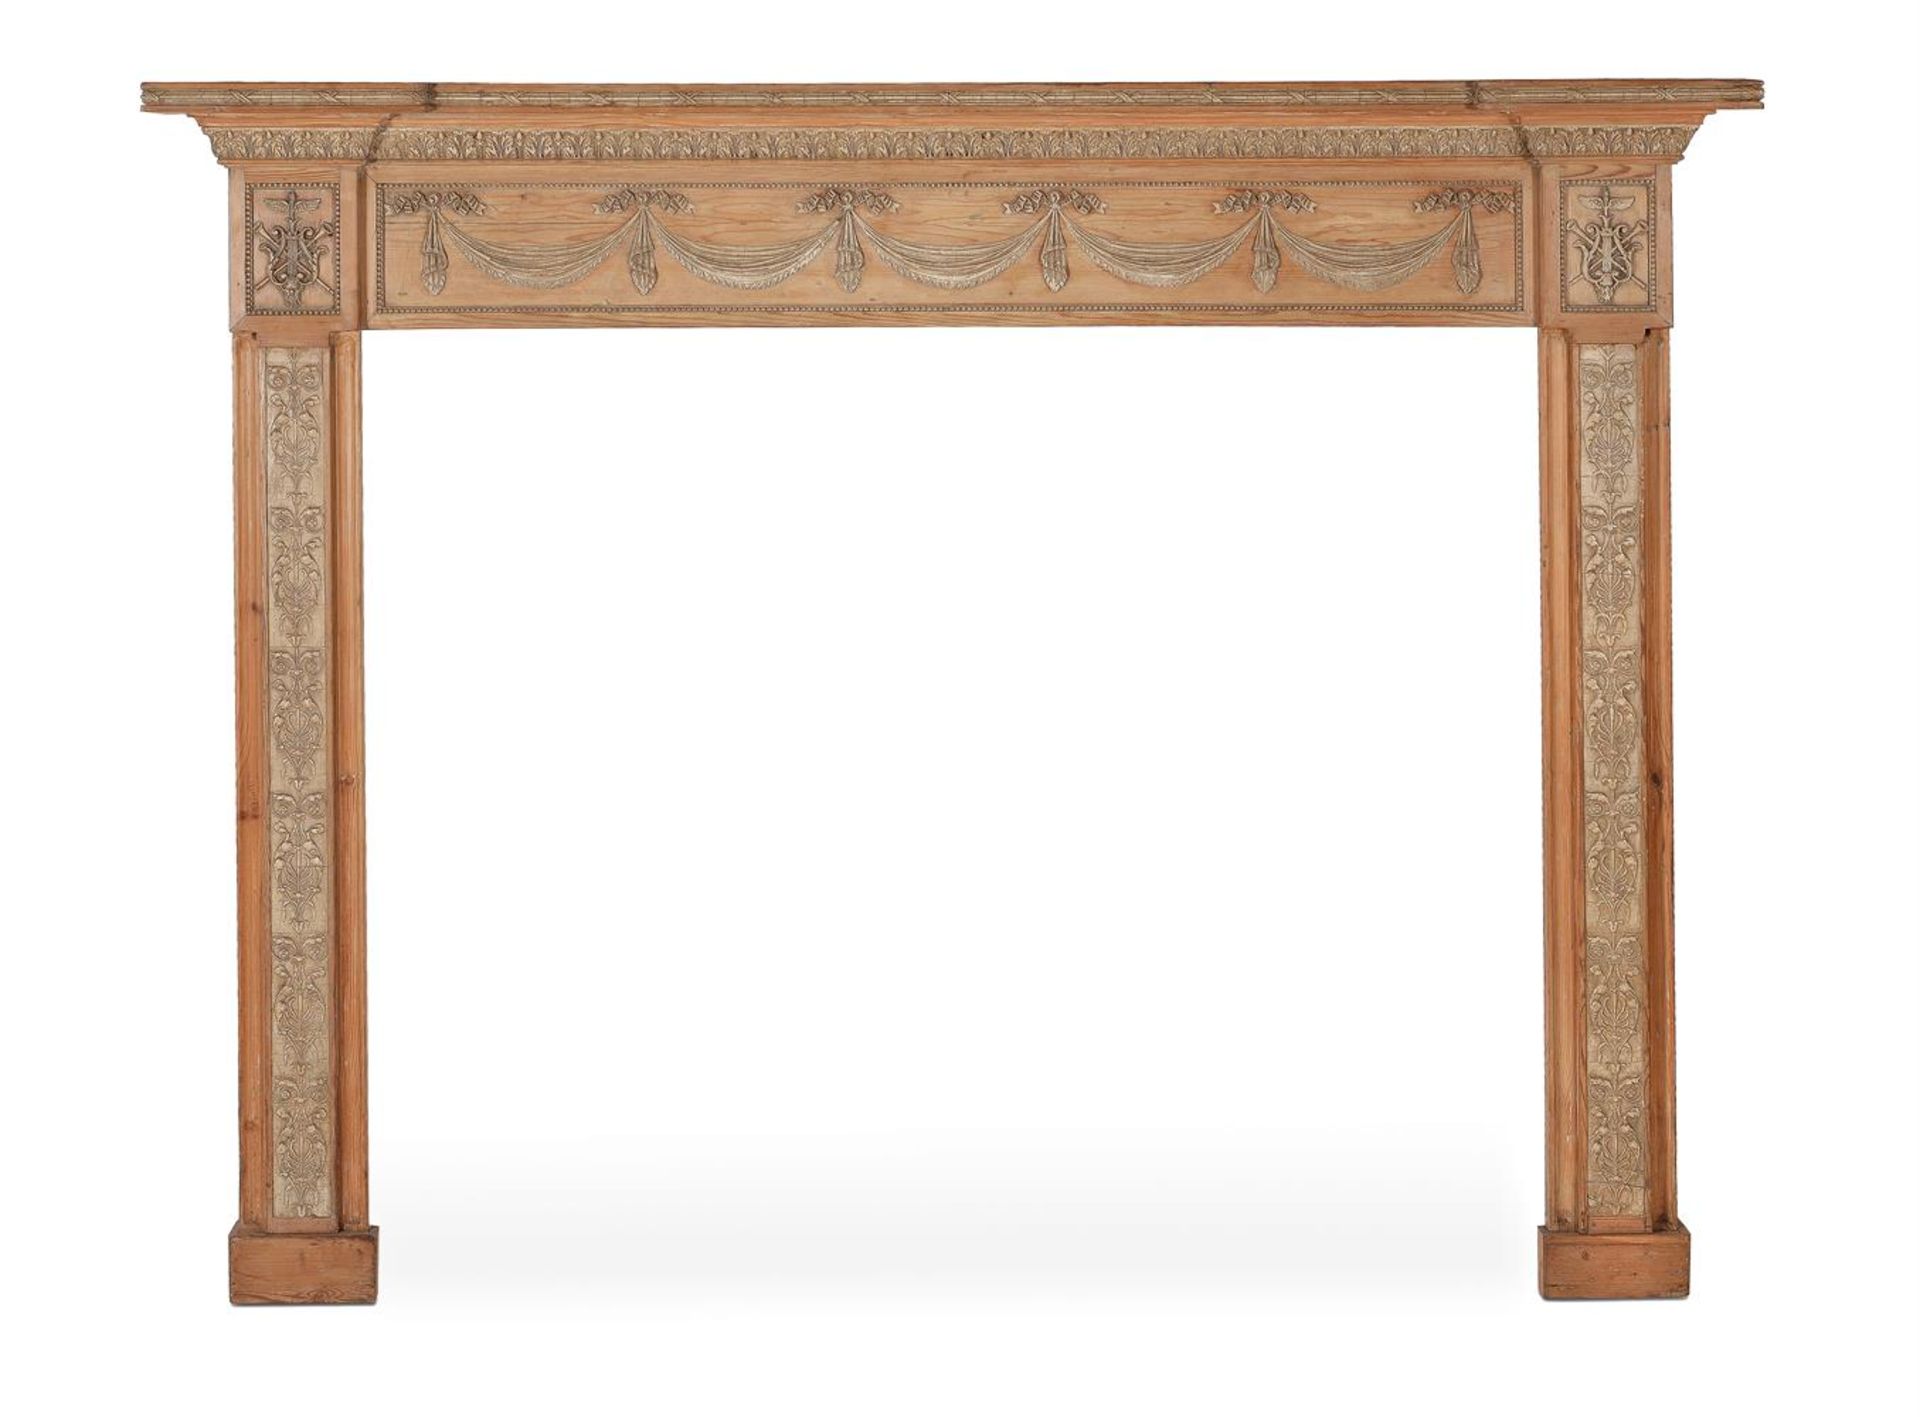 A PINE AND GESSO FIRE SURROUND, 19TH CENTURY